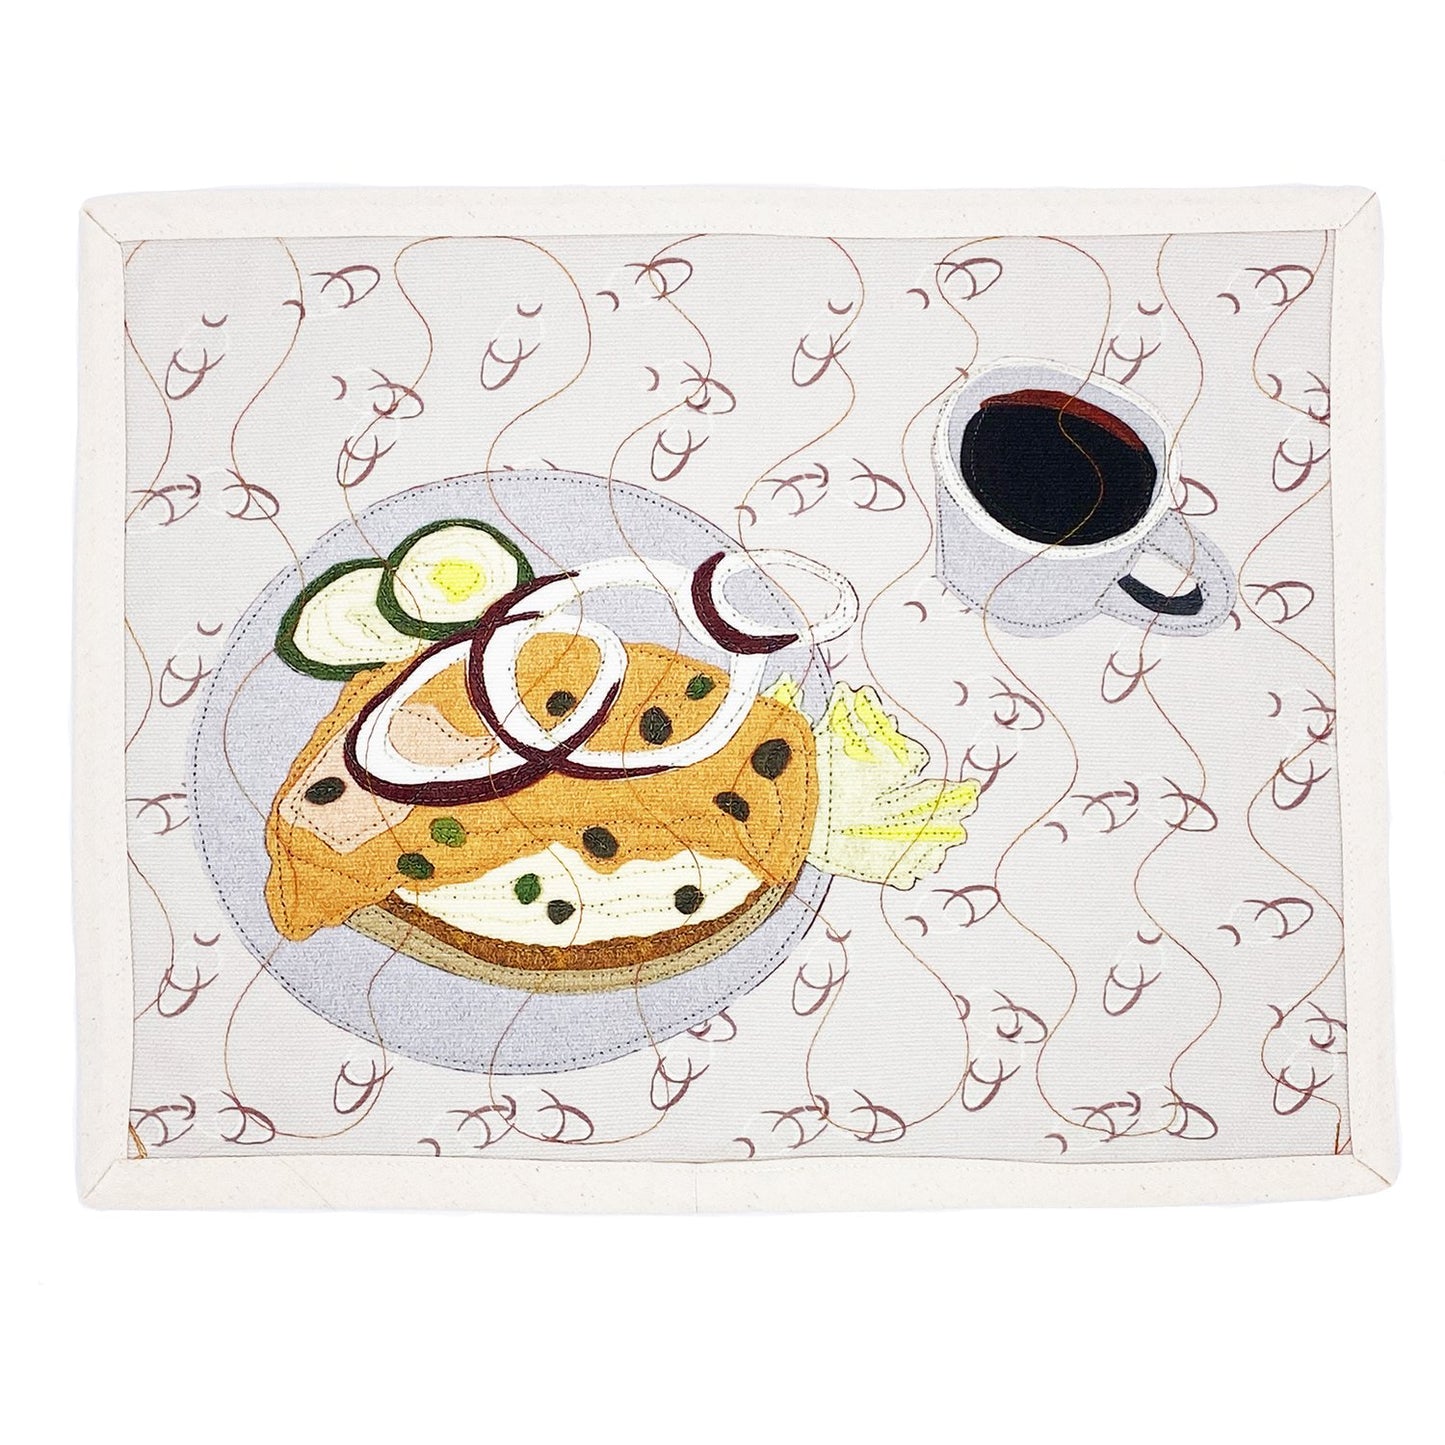 Bagel and lox and coffee placemat by Quirky Digs -- printed and topstitched poly canvas placemat 